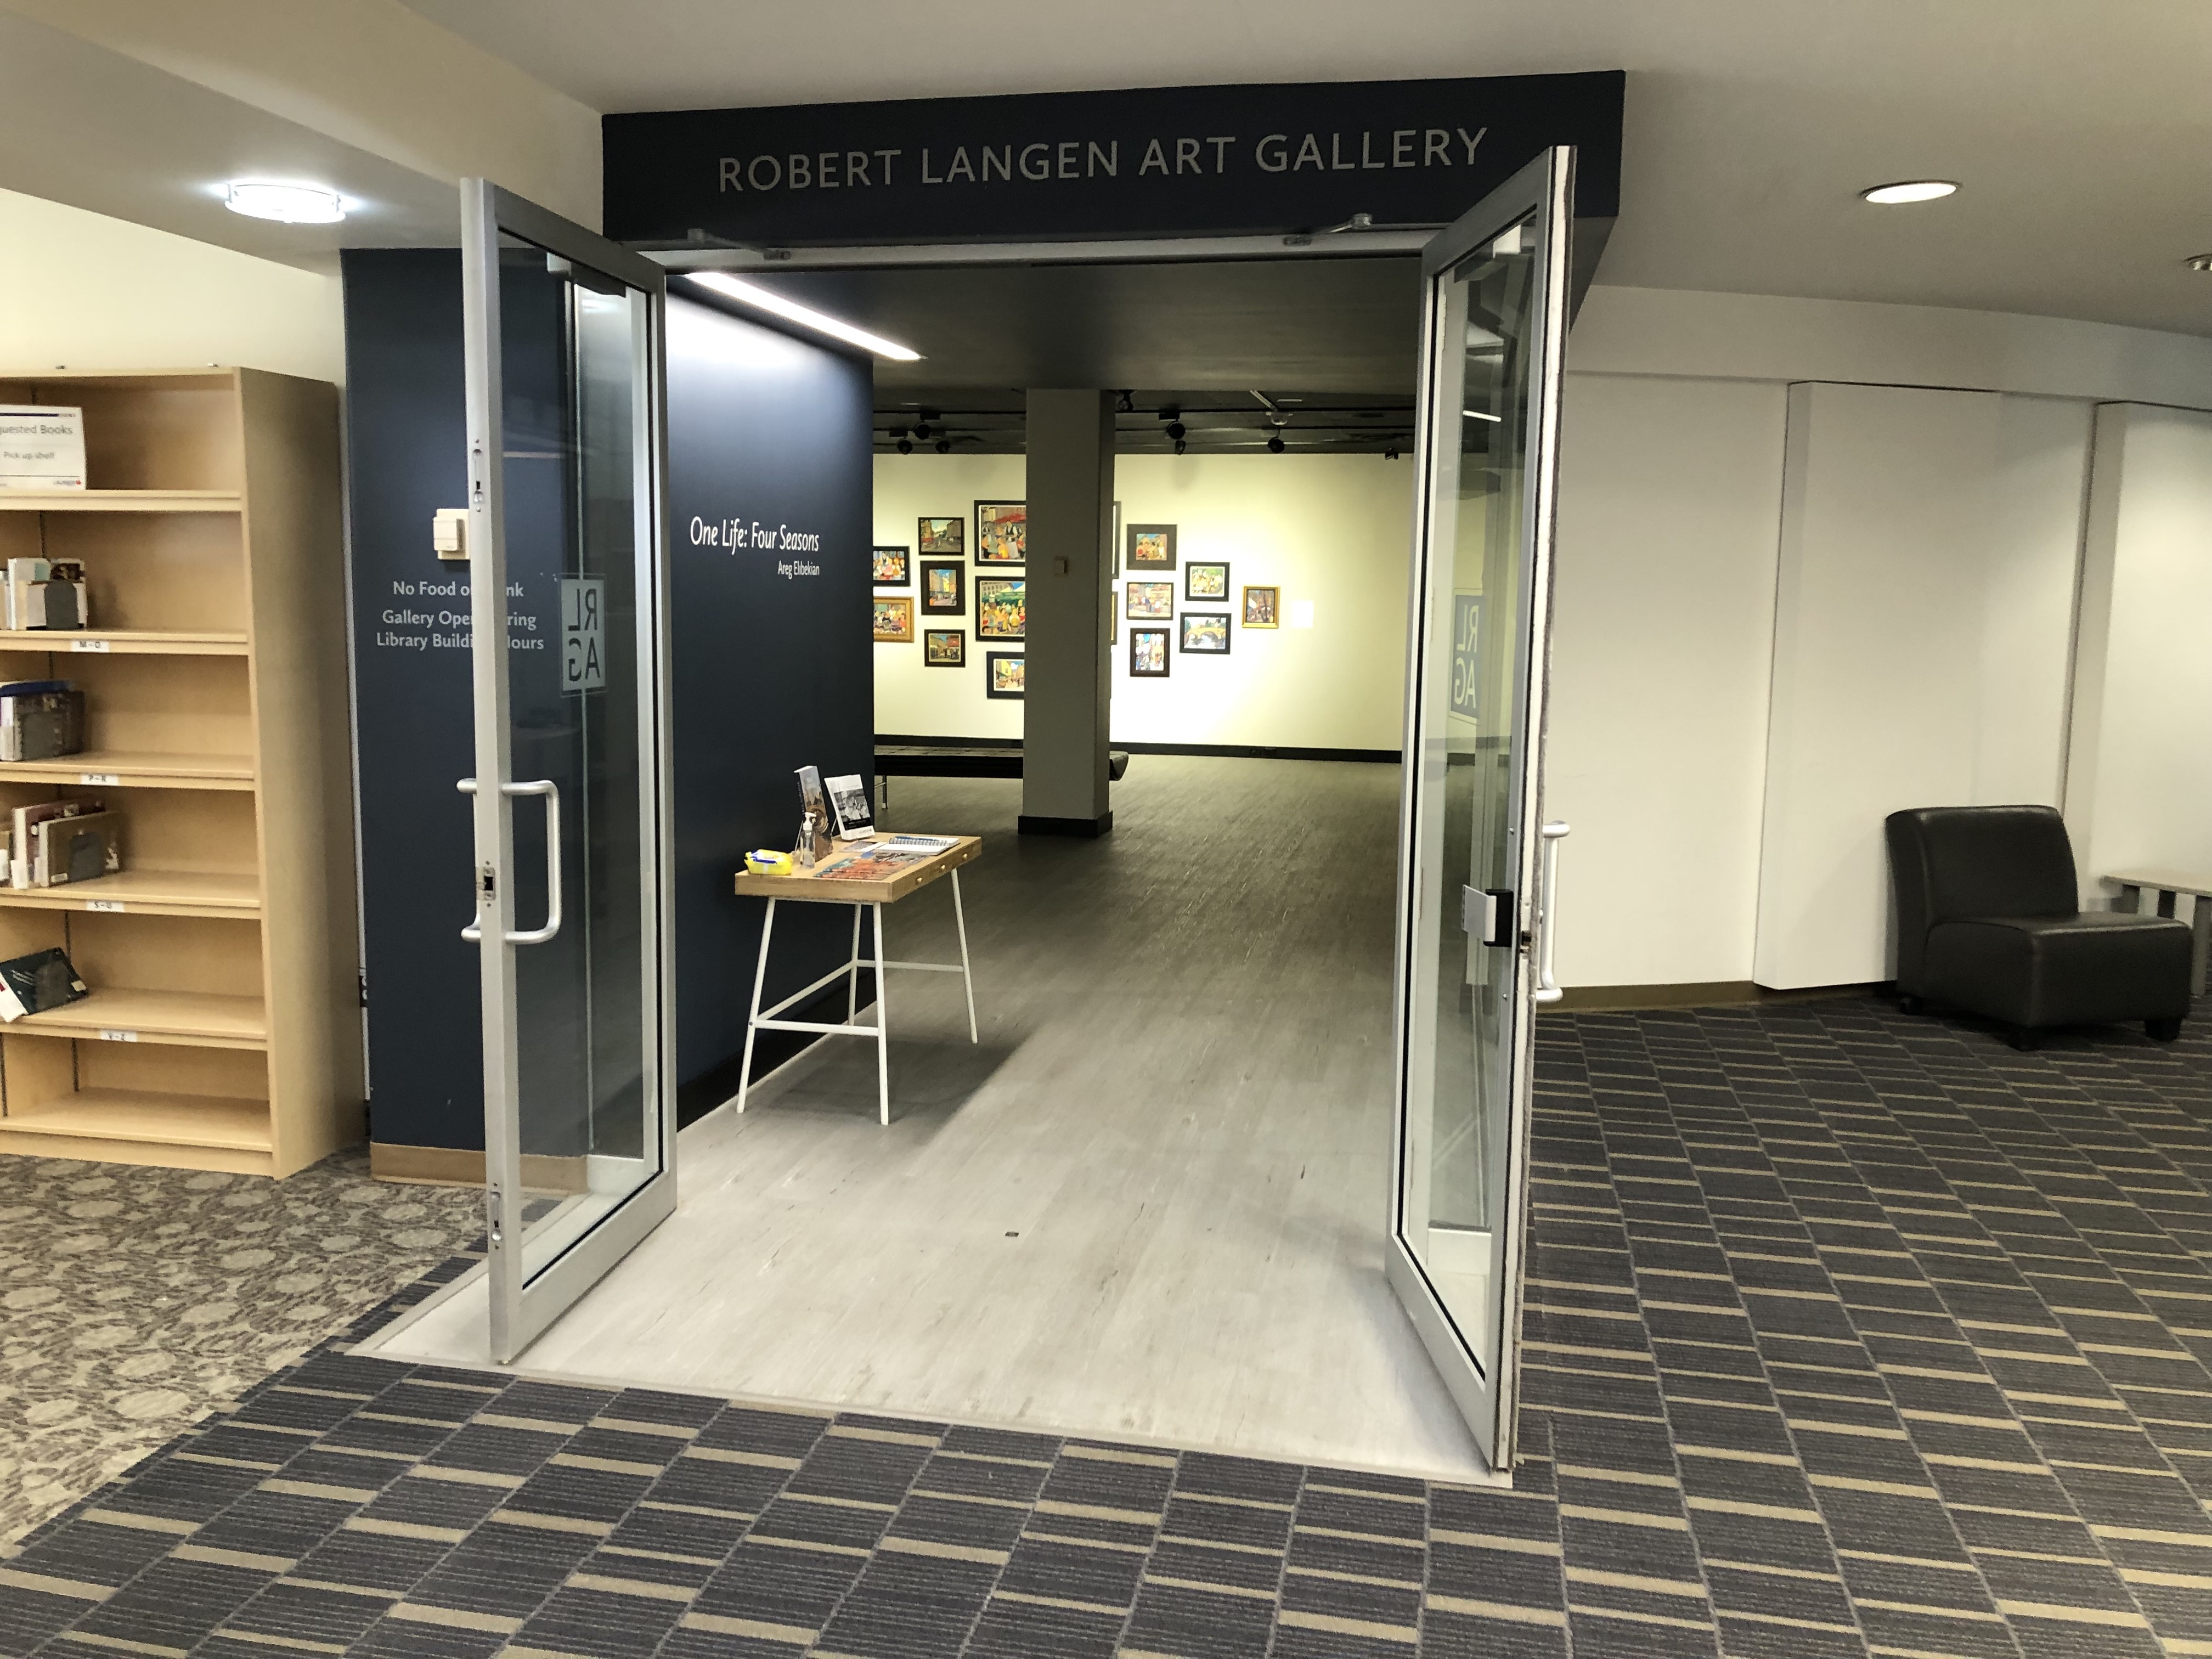 The entrance to the gallery. The doors are open towards the lobby. The surface of the gallery floor is solid, while the library lobby is carpeted. 